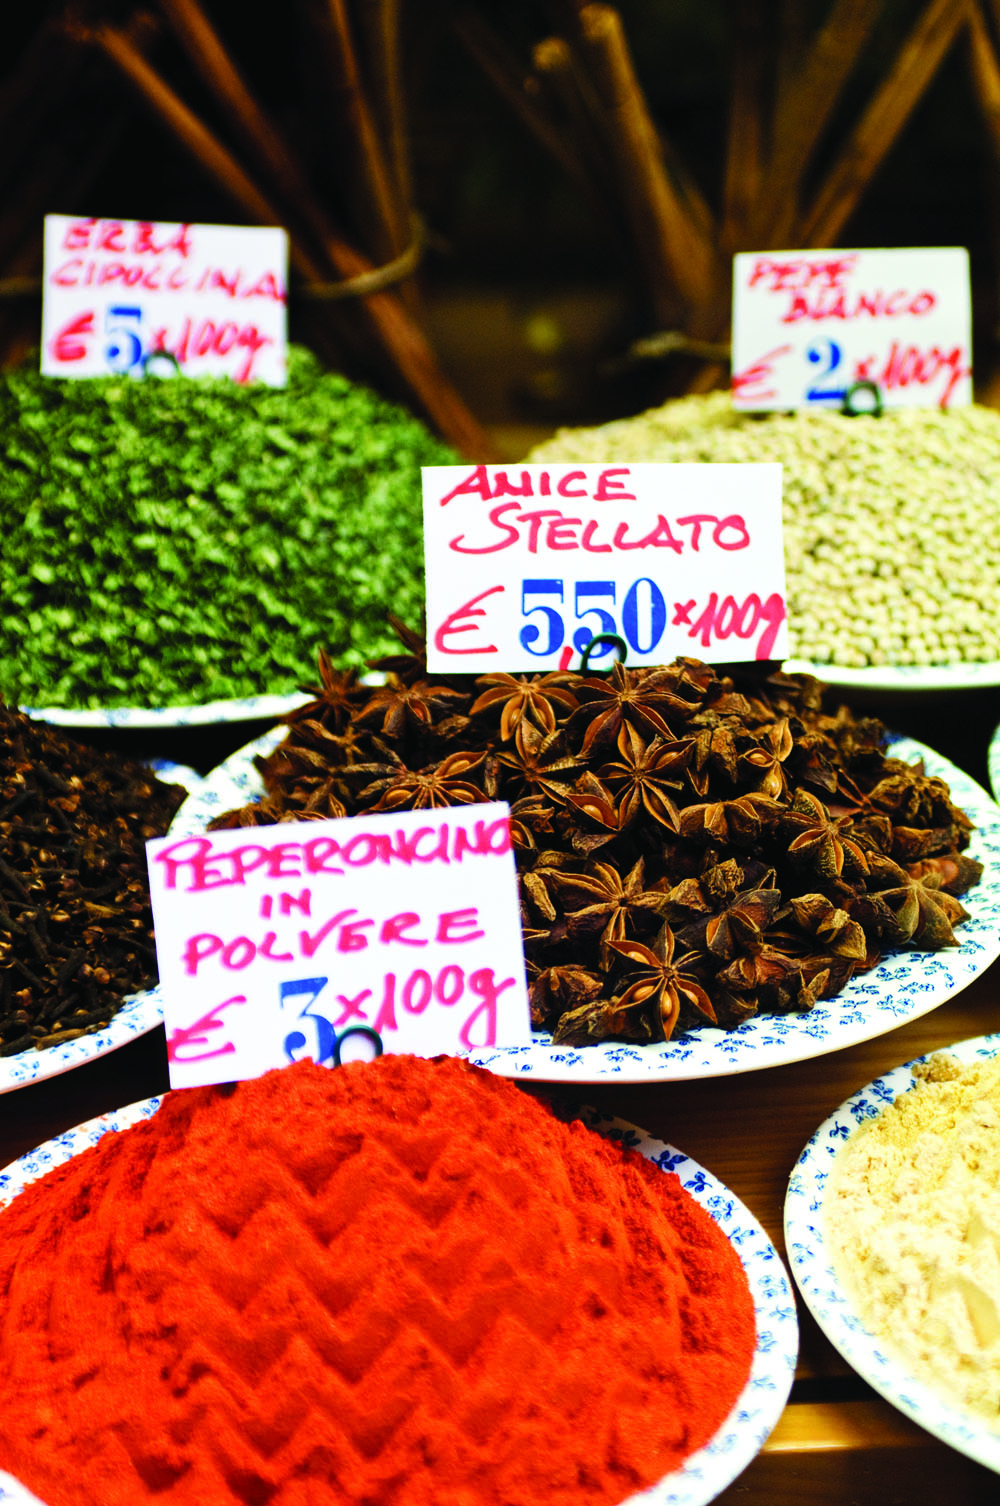 Spices and herbs for sale in a shop in Venice